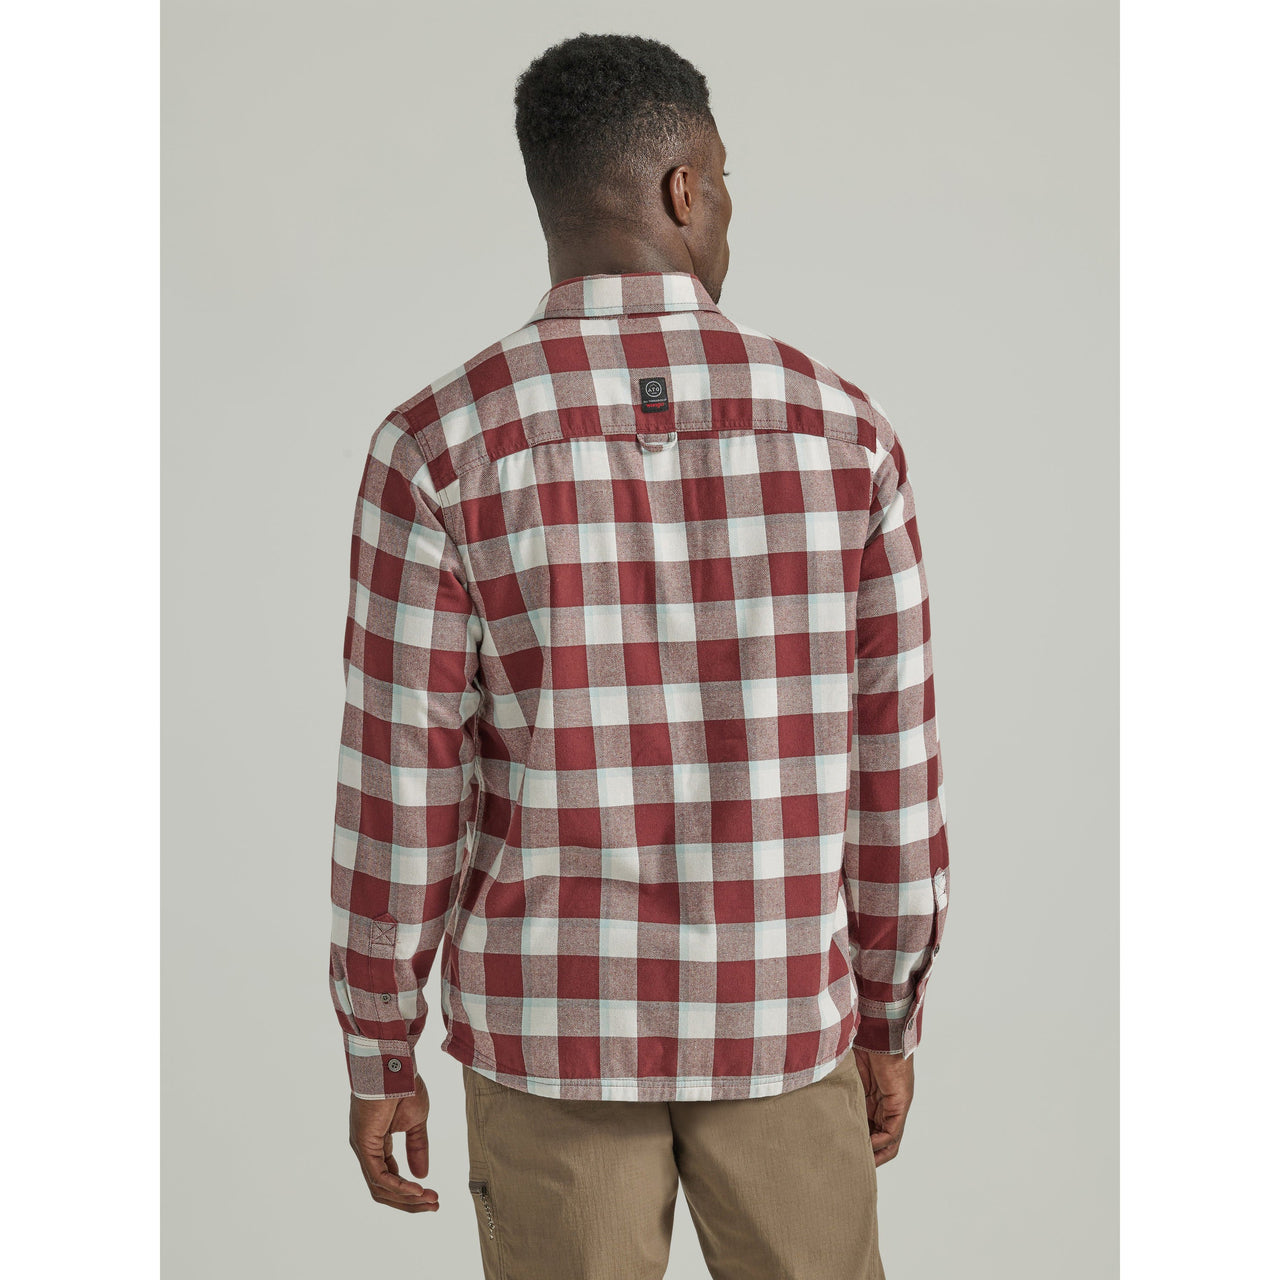 Wrangler Men's Thermal Lined Flannel Shirt - Red